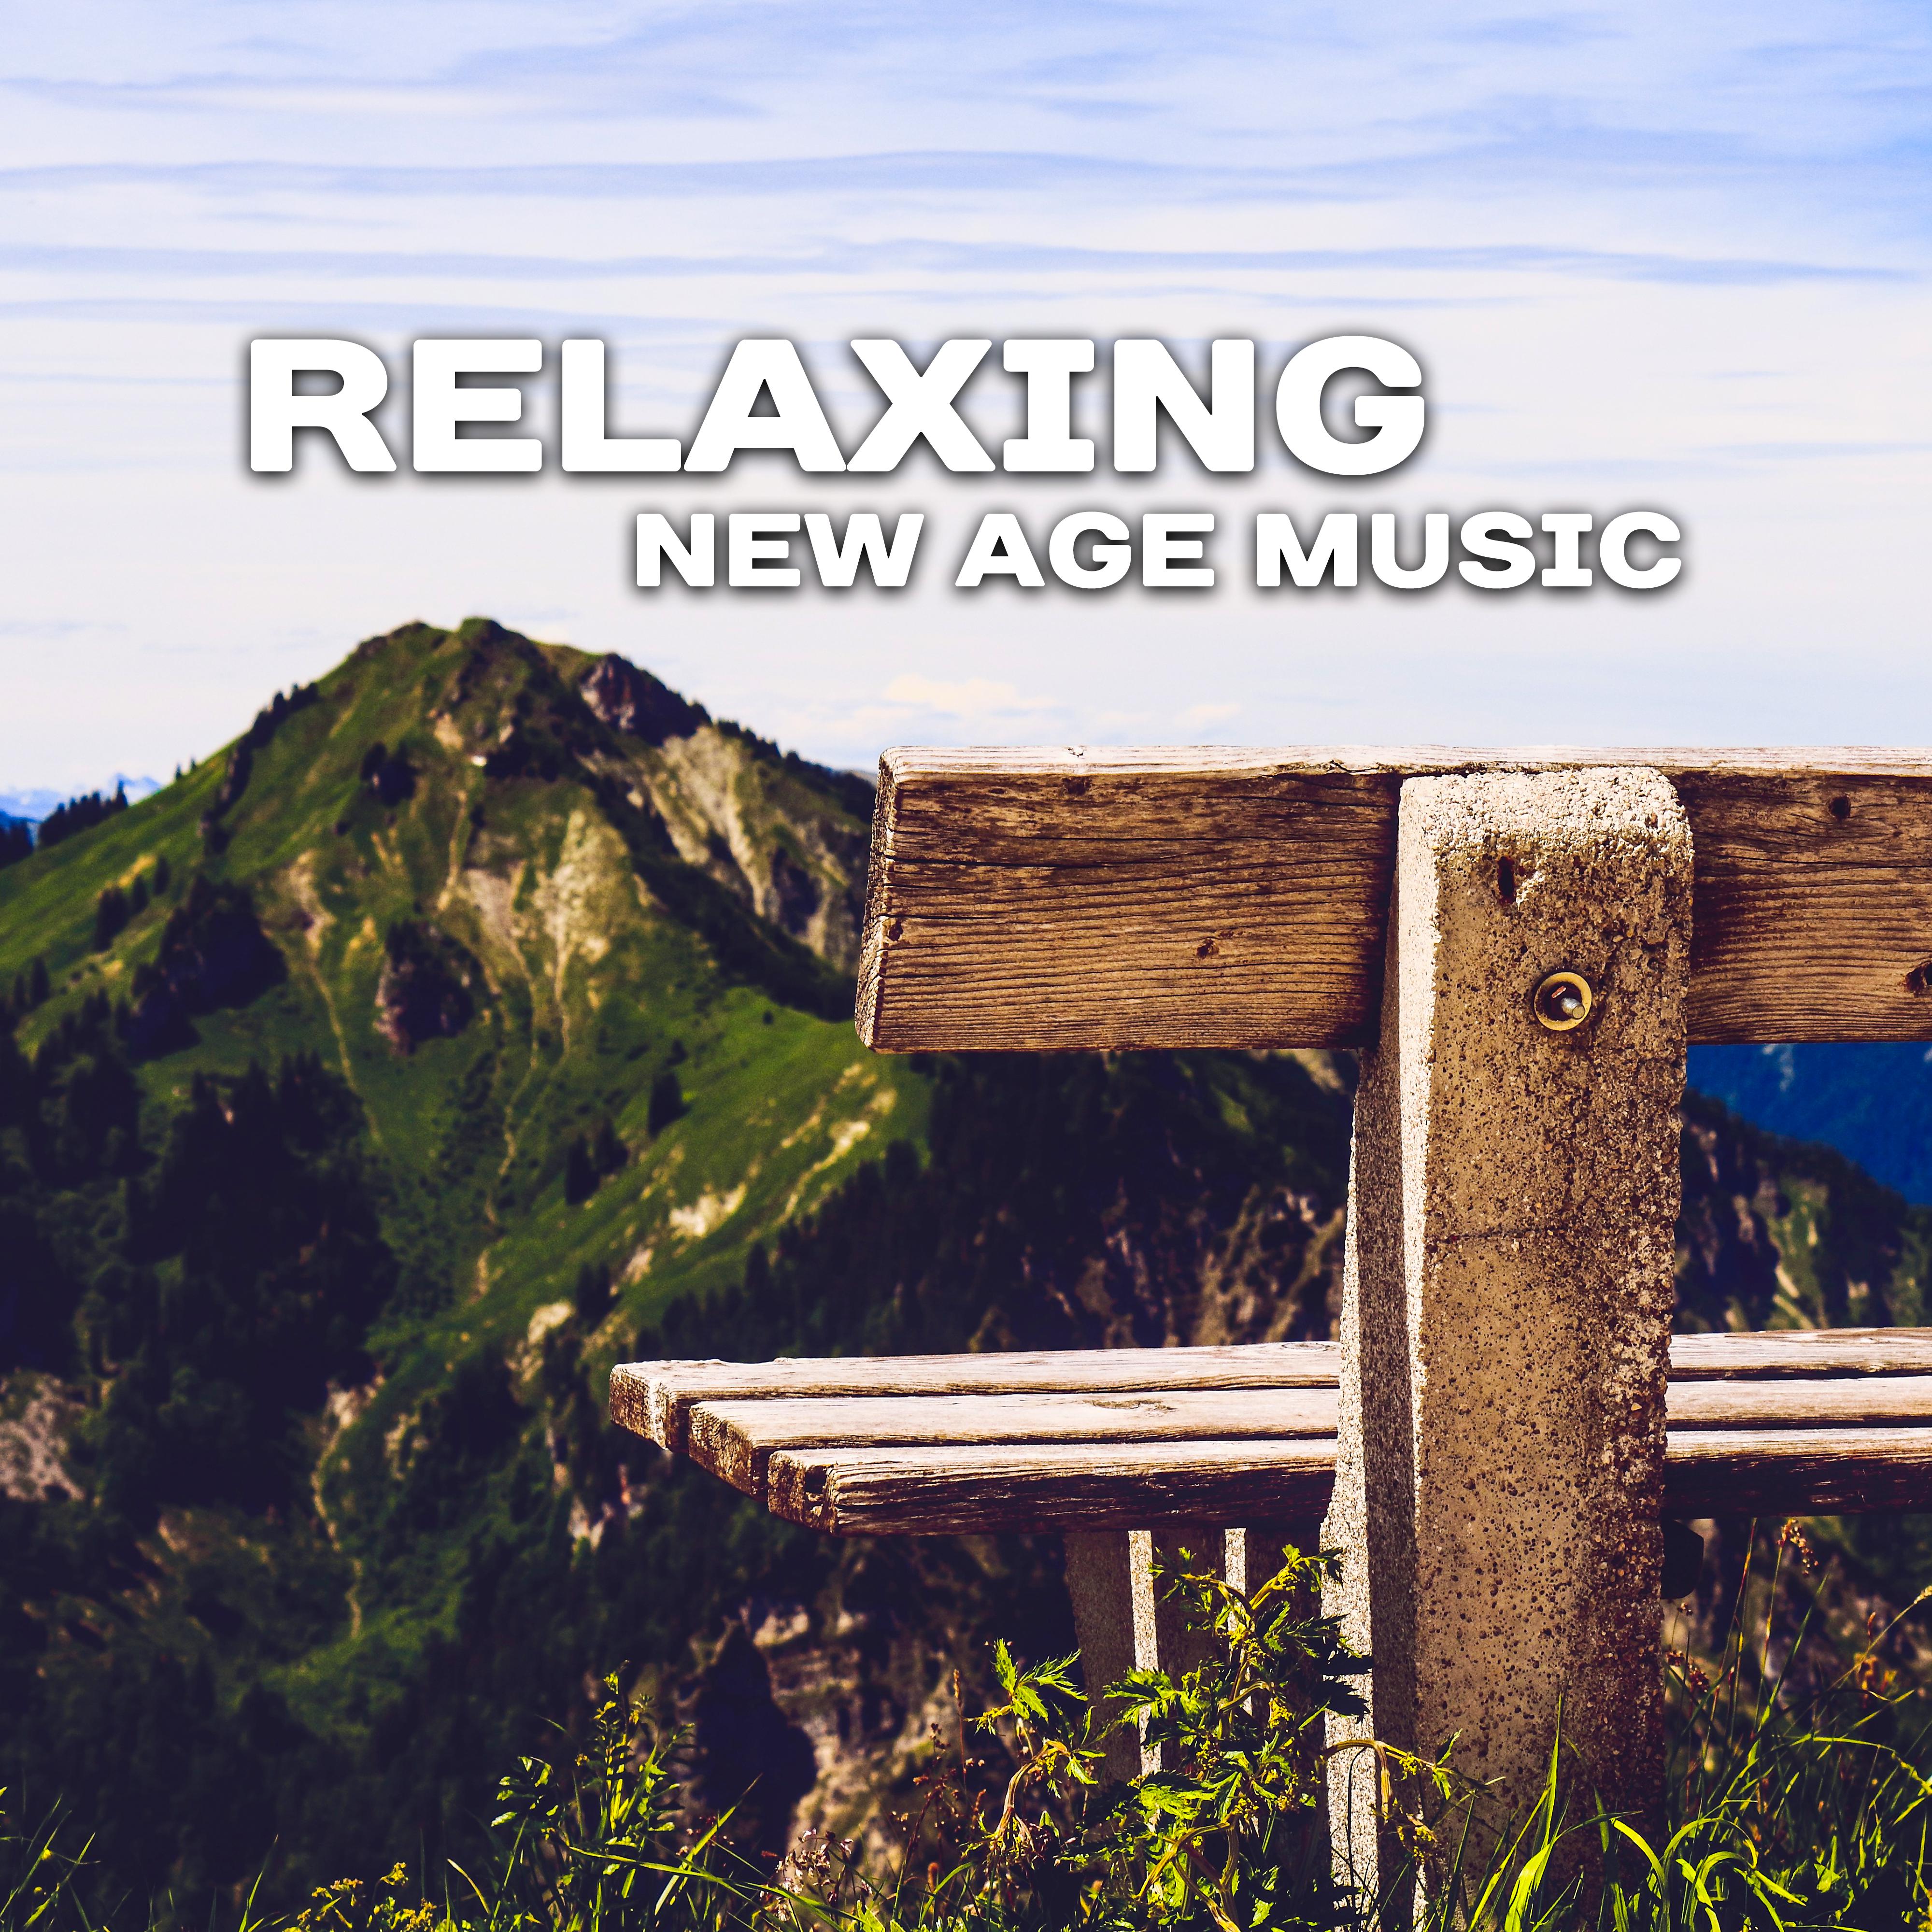 Relaxing New Age Music – Stress Relief, Time to Rest, Calming Sounds, Chill Day with New Age